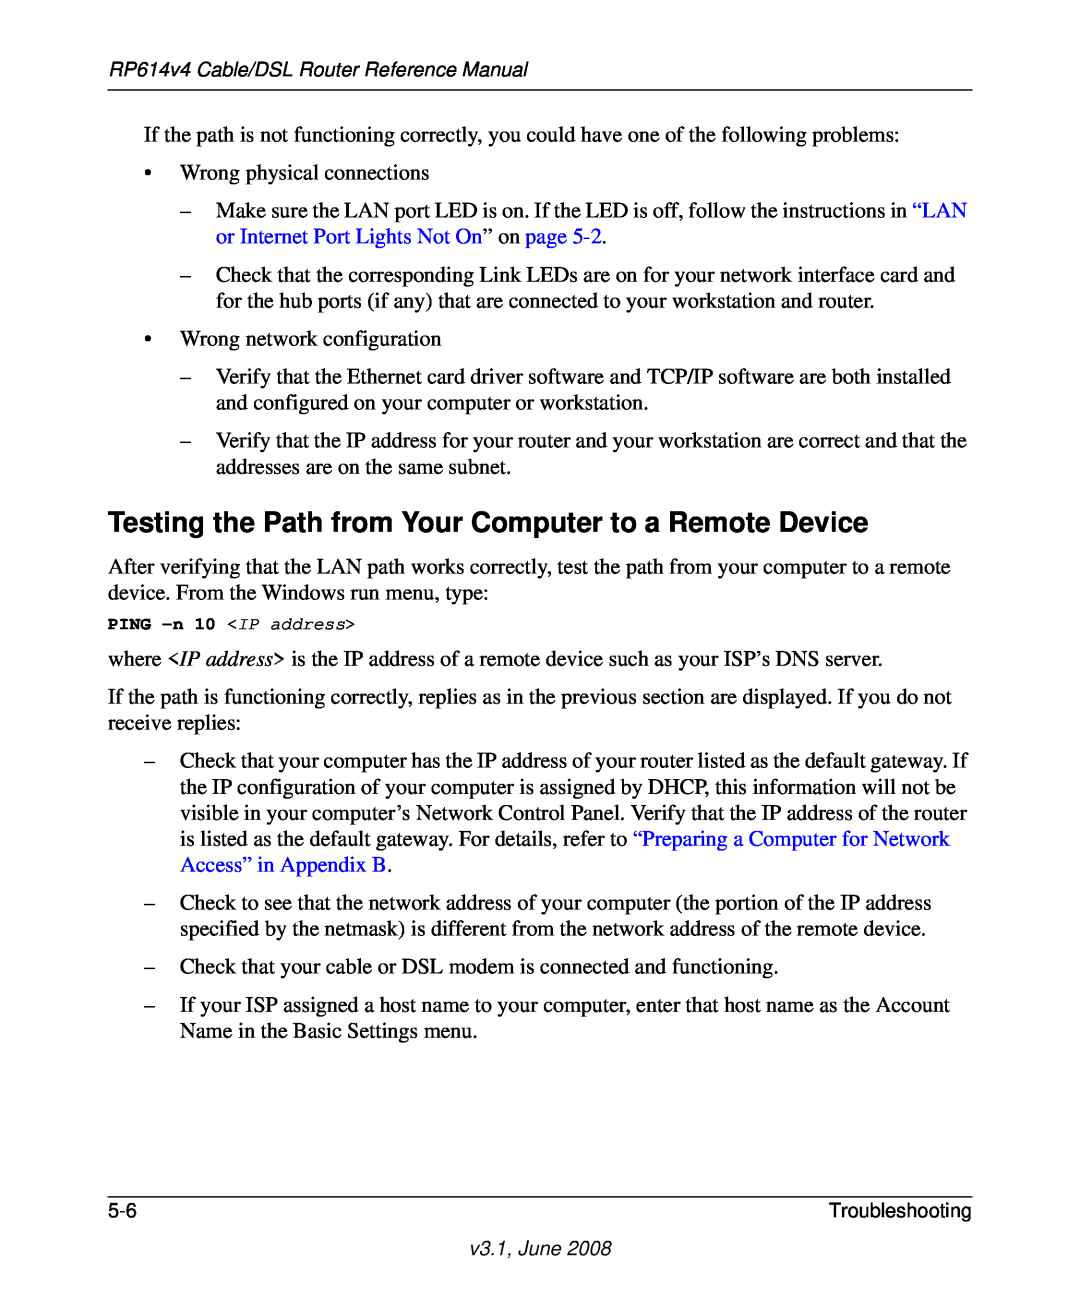 NETGEAR RP614 v4 manual Testing the Path from Your Computer to a Remote Device 